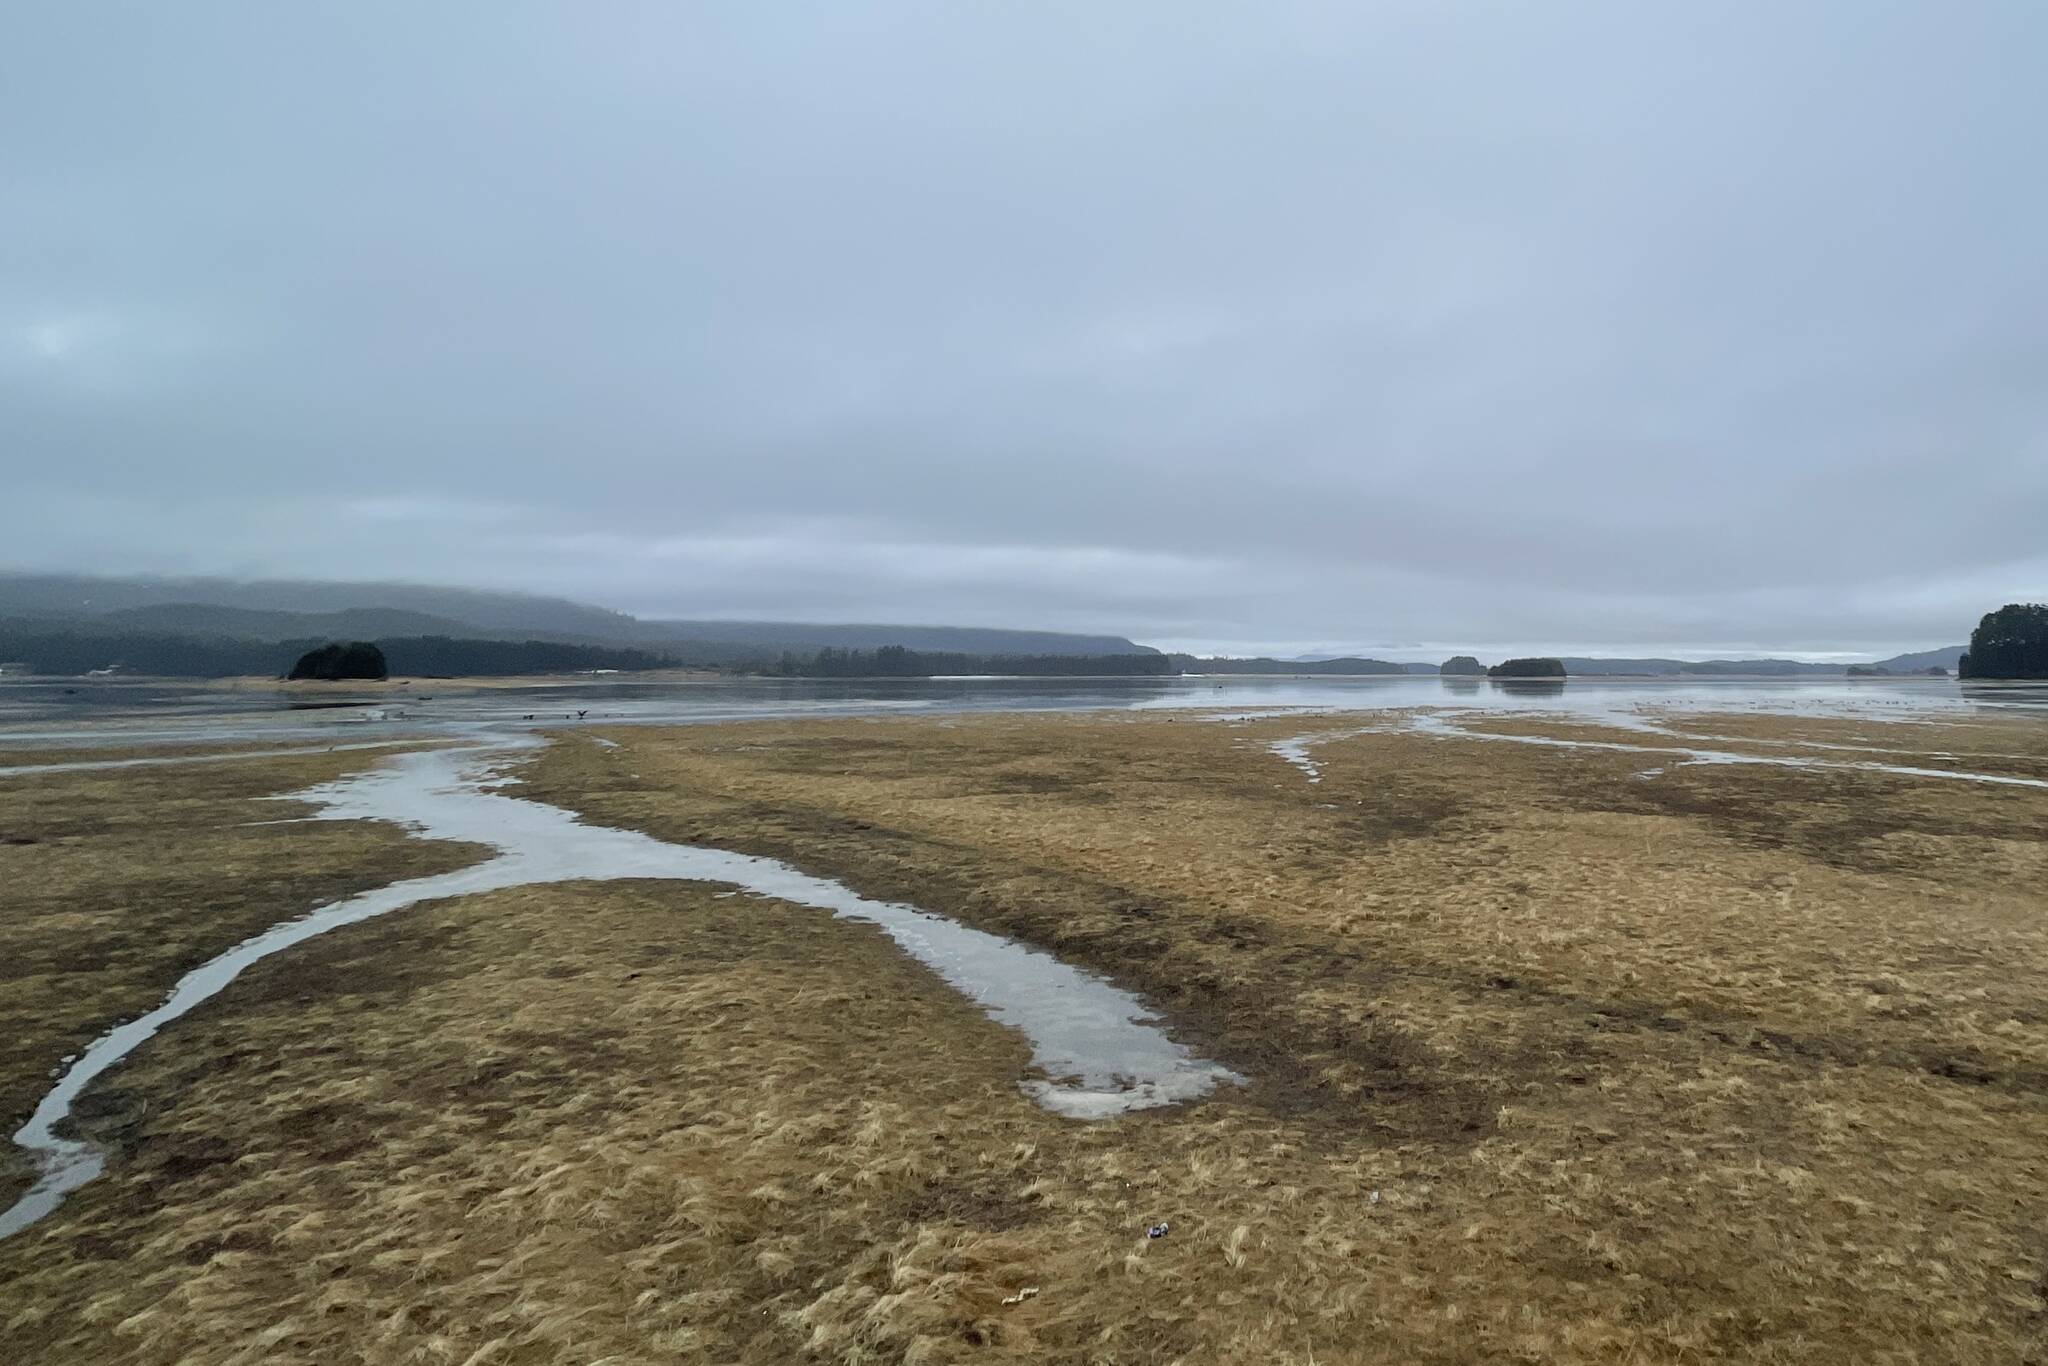 The Mendenhall Wetlands, among the lowest parts of Juneau, are still considerably higher out of the water than the area used to be, said the city’s port engineer.(Michael S. Lockett / Juneau Empire)